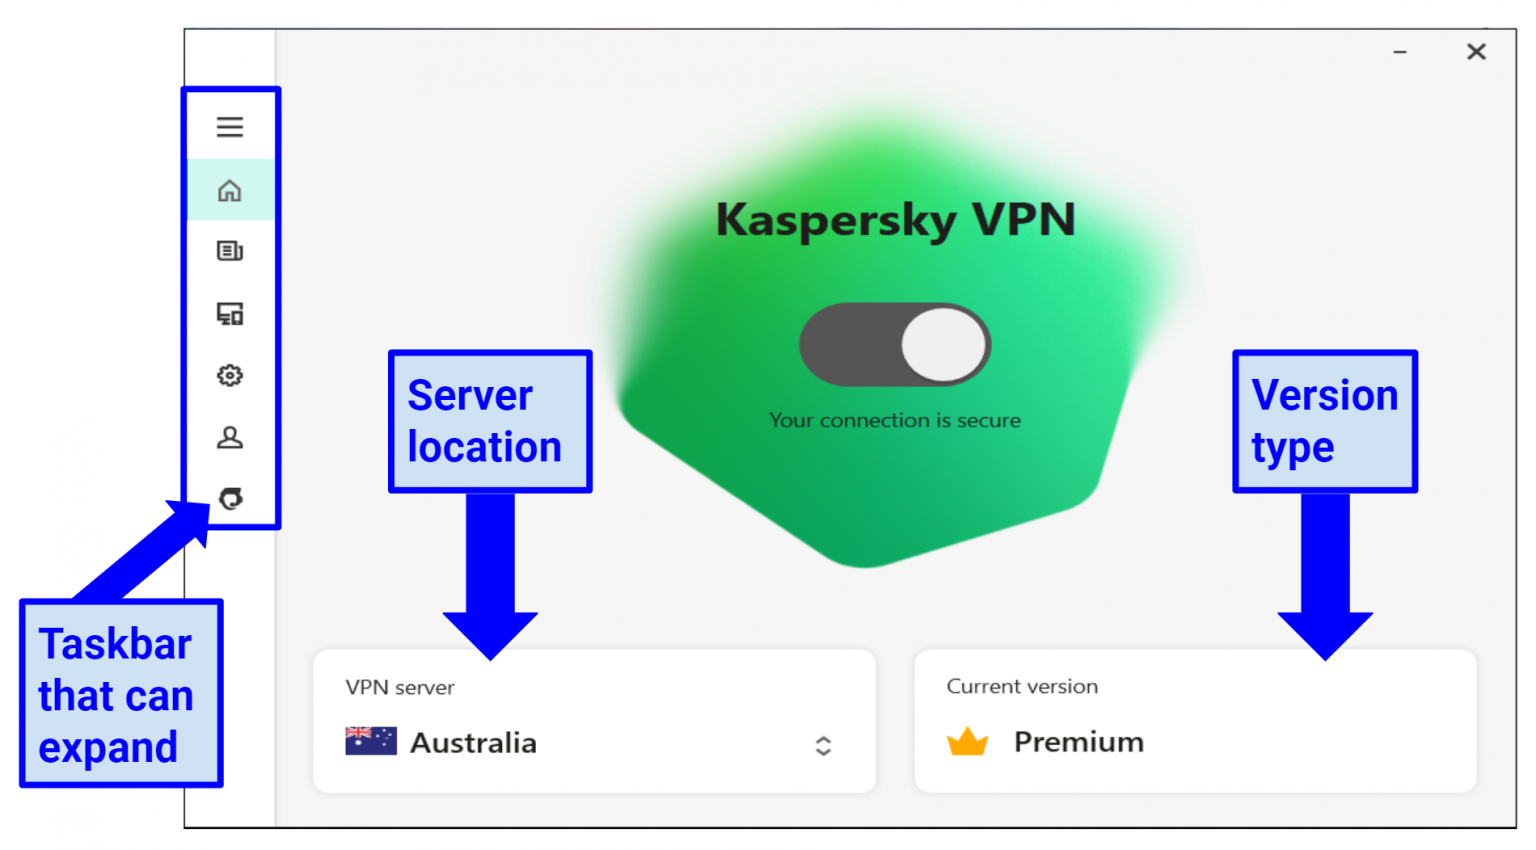 Connected secured. Kaspersky secure connection. Kaspersky client. Kaspersky secure mail Gateway. Kaspersky secure Remote Workspace.